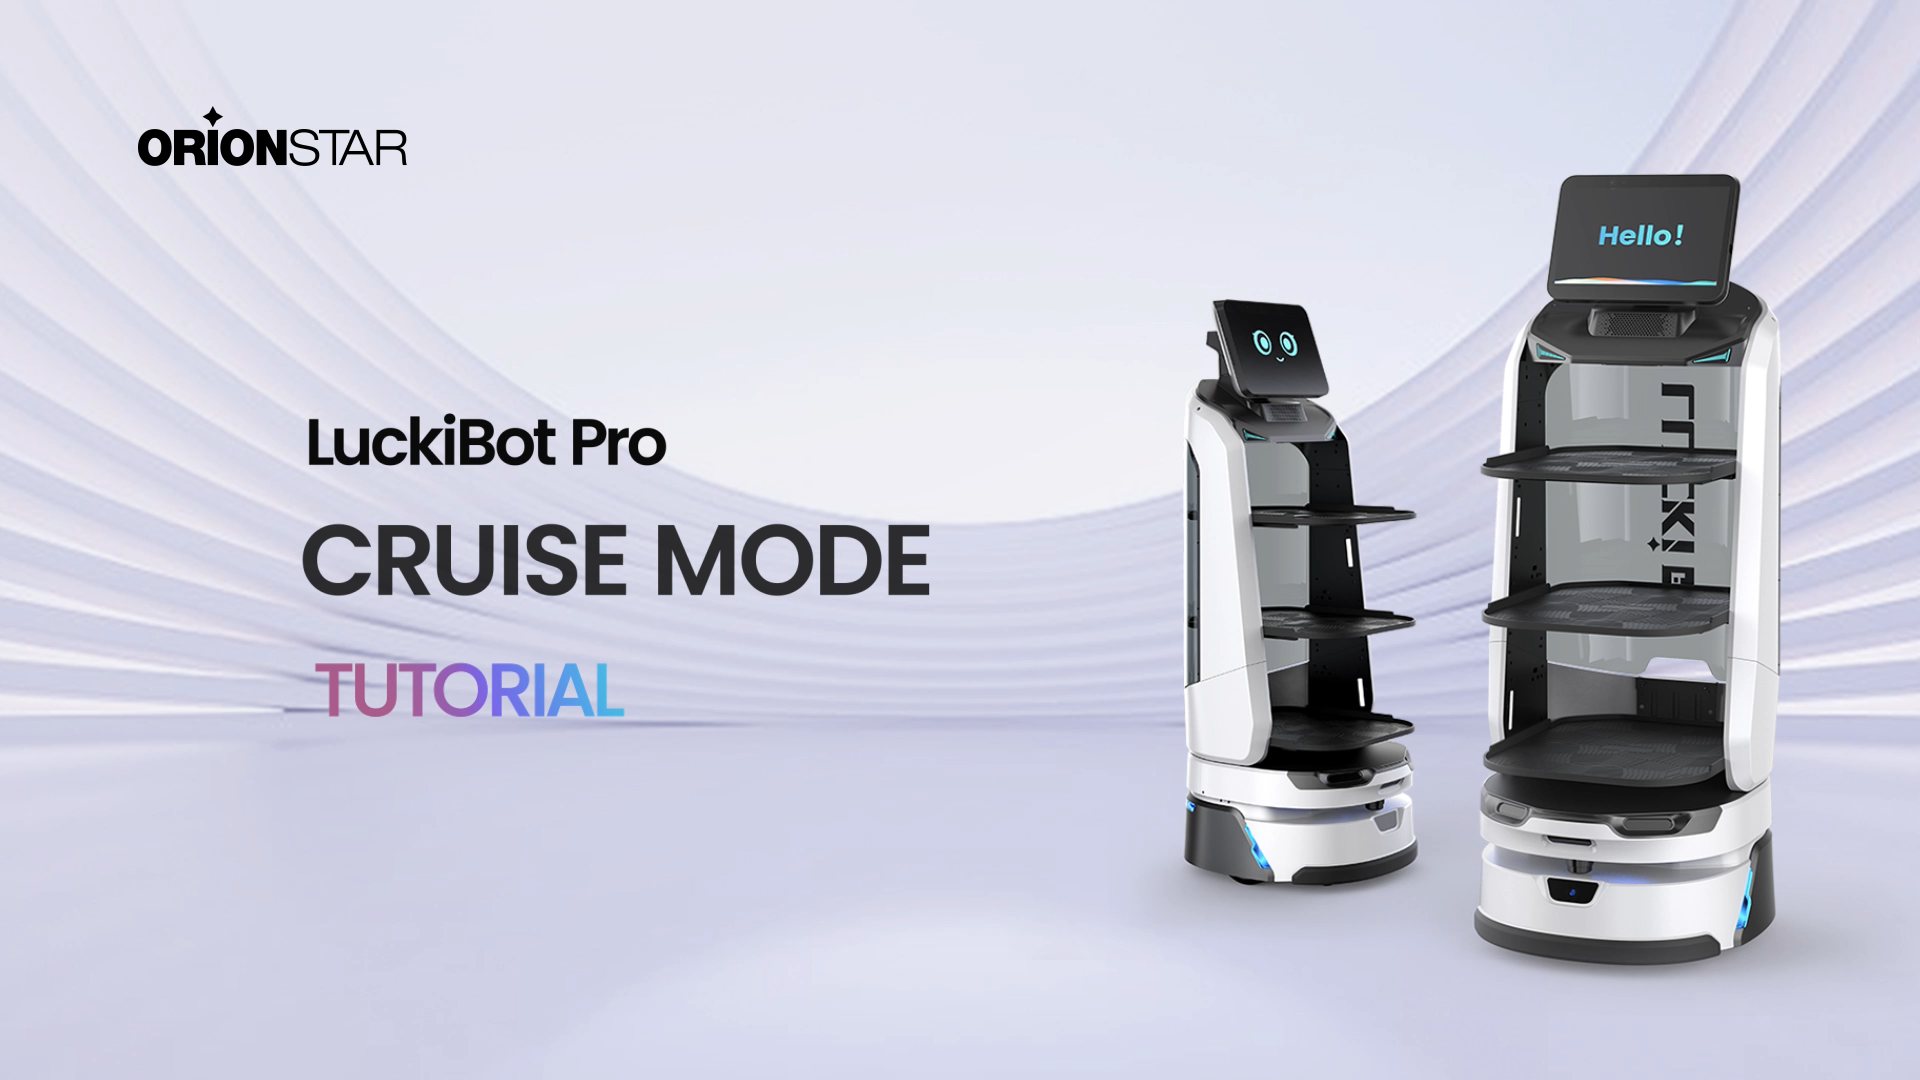 Discover the Cruise Mode Tutorial for LuckiBot Pro.